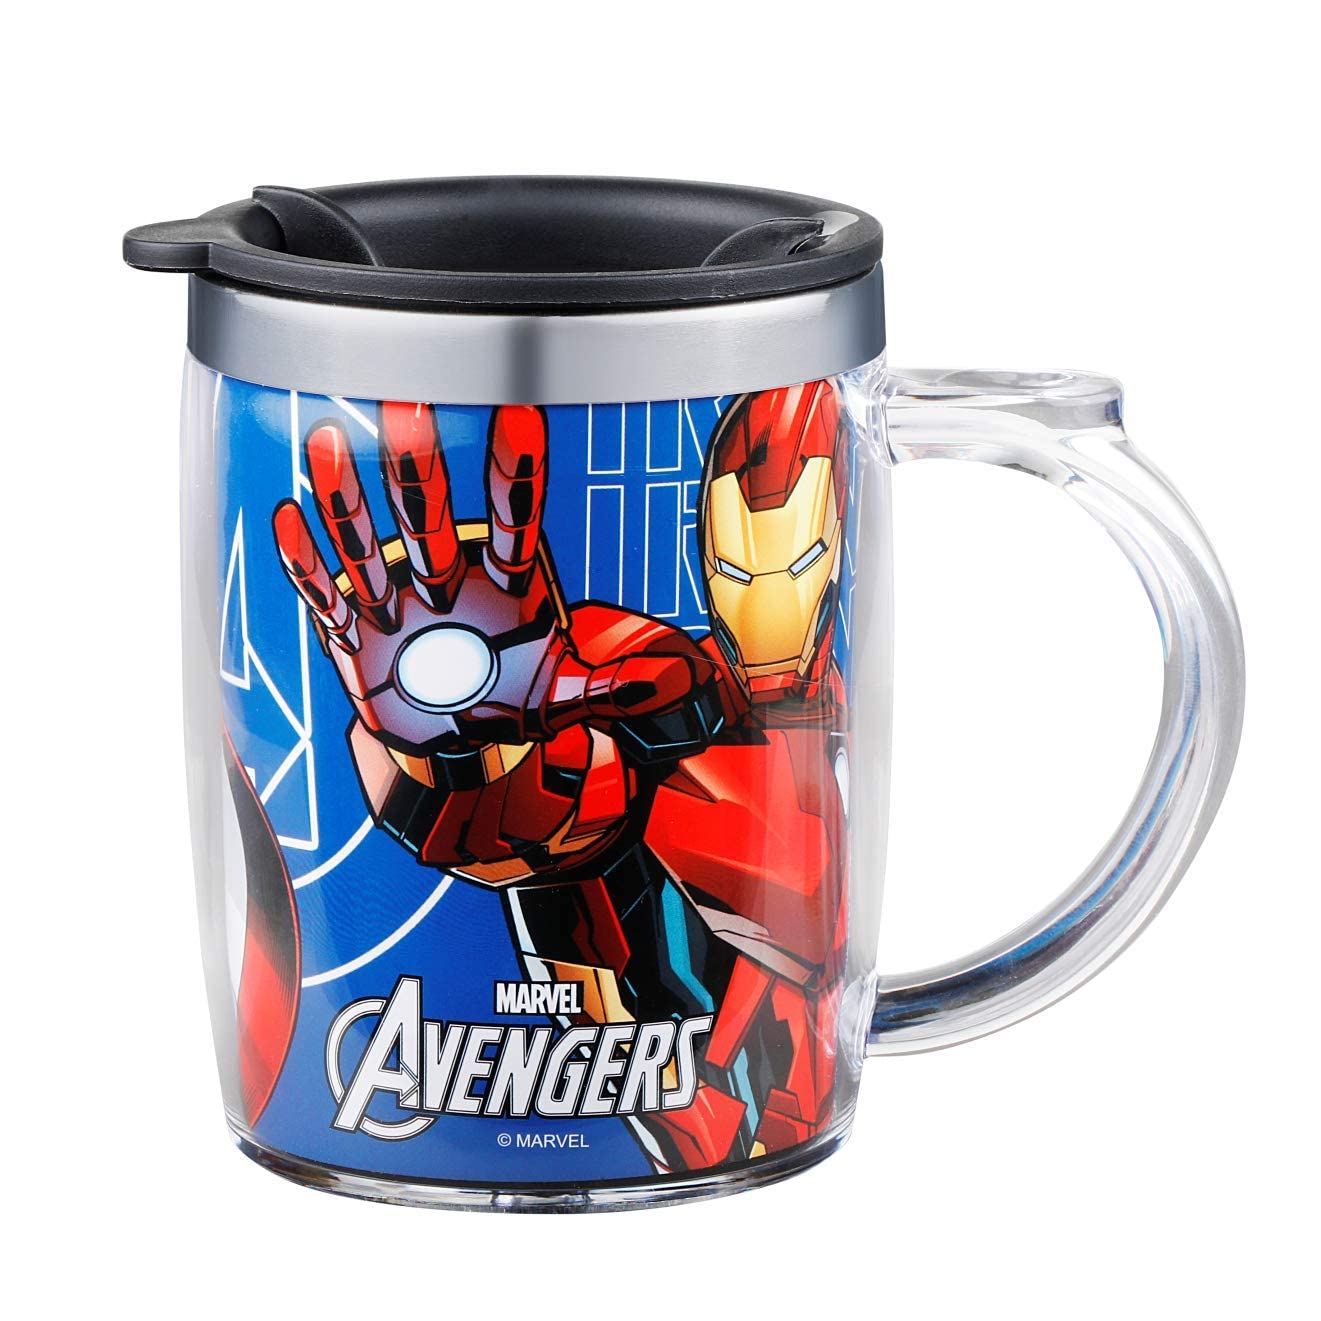 SKI Cherry Avengers Stainless Steel Mug with Sipper Lid 350 ml